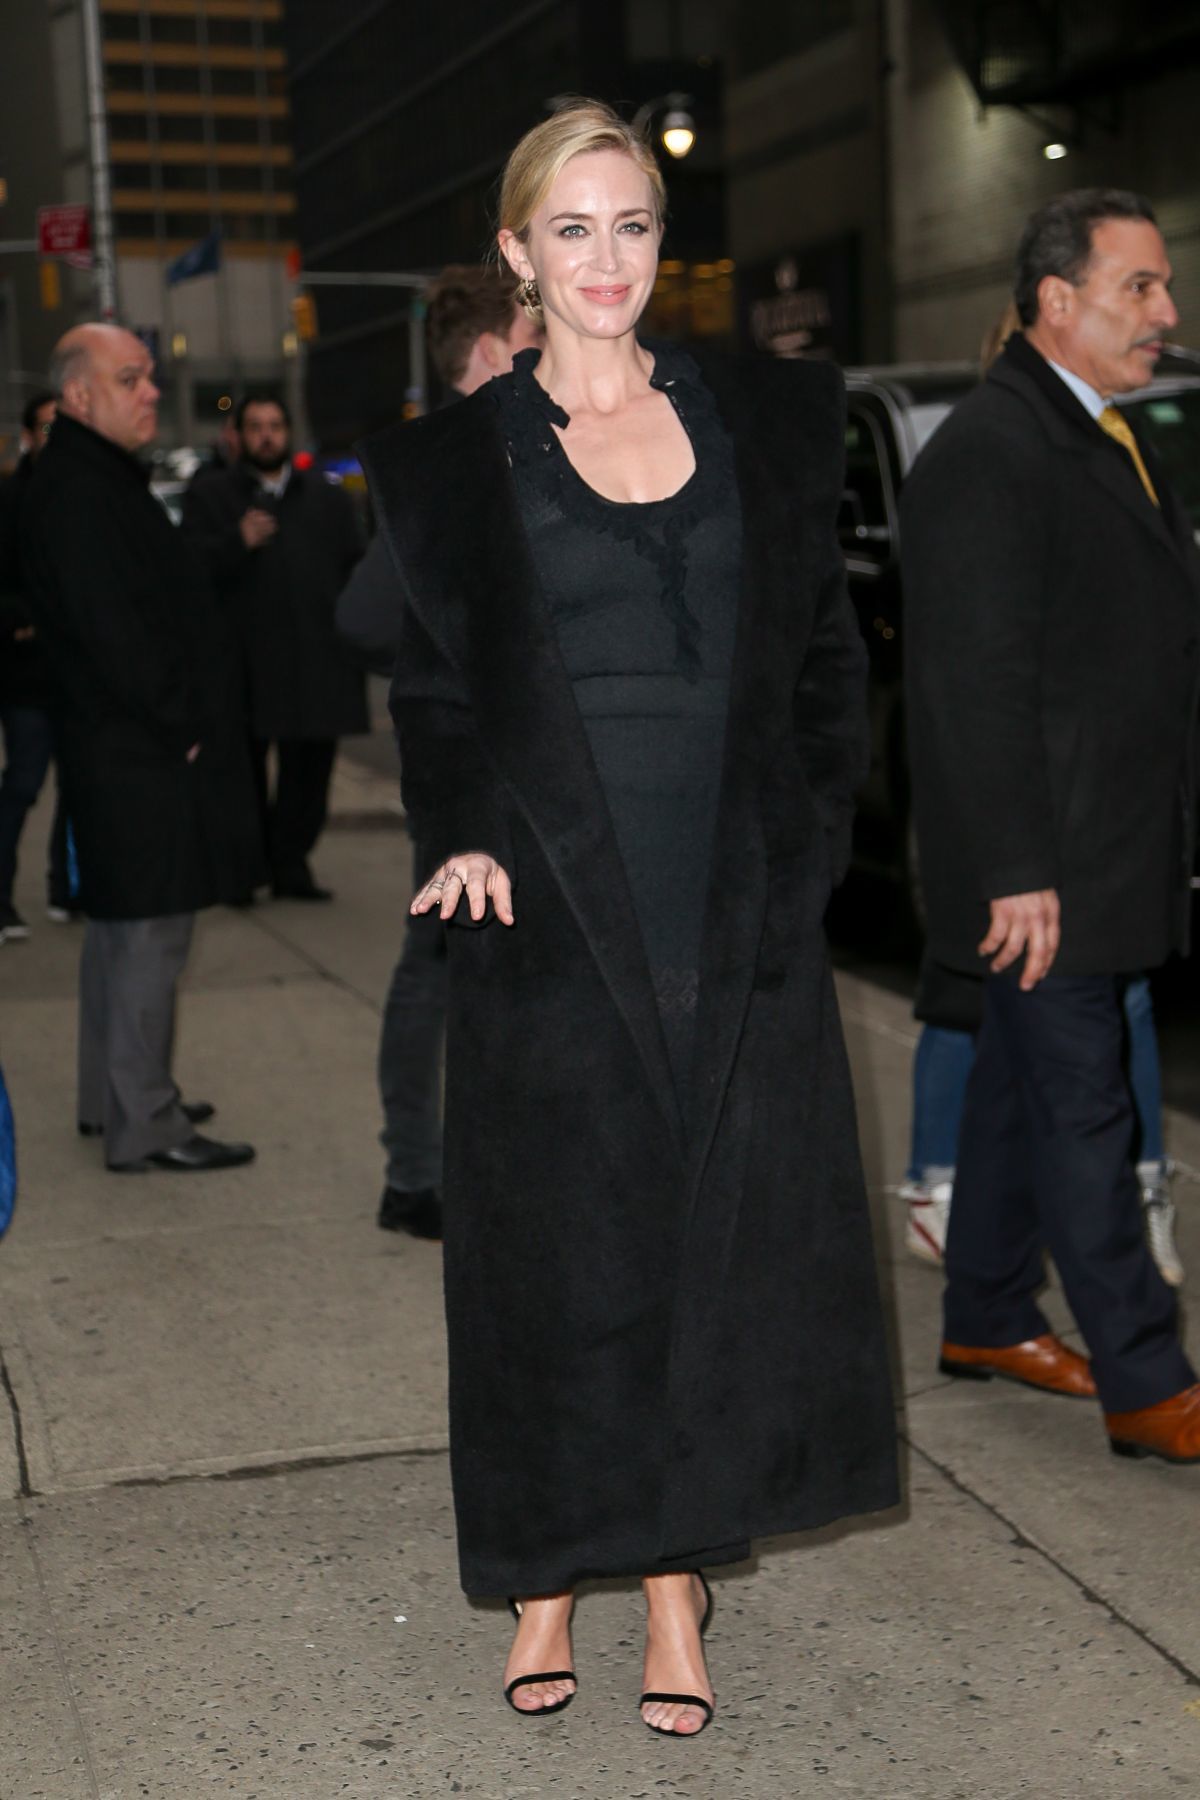 emily-blunt-arriving-at-the-late-show-with-stephen-colbert-in-nyc-32918-4.jpeg